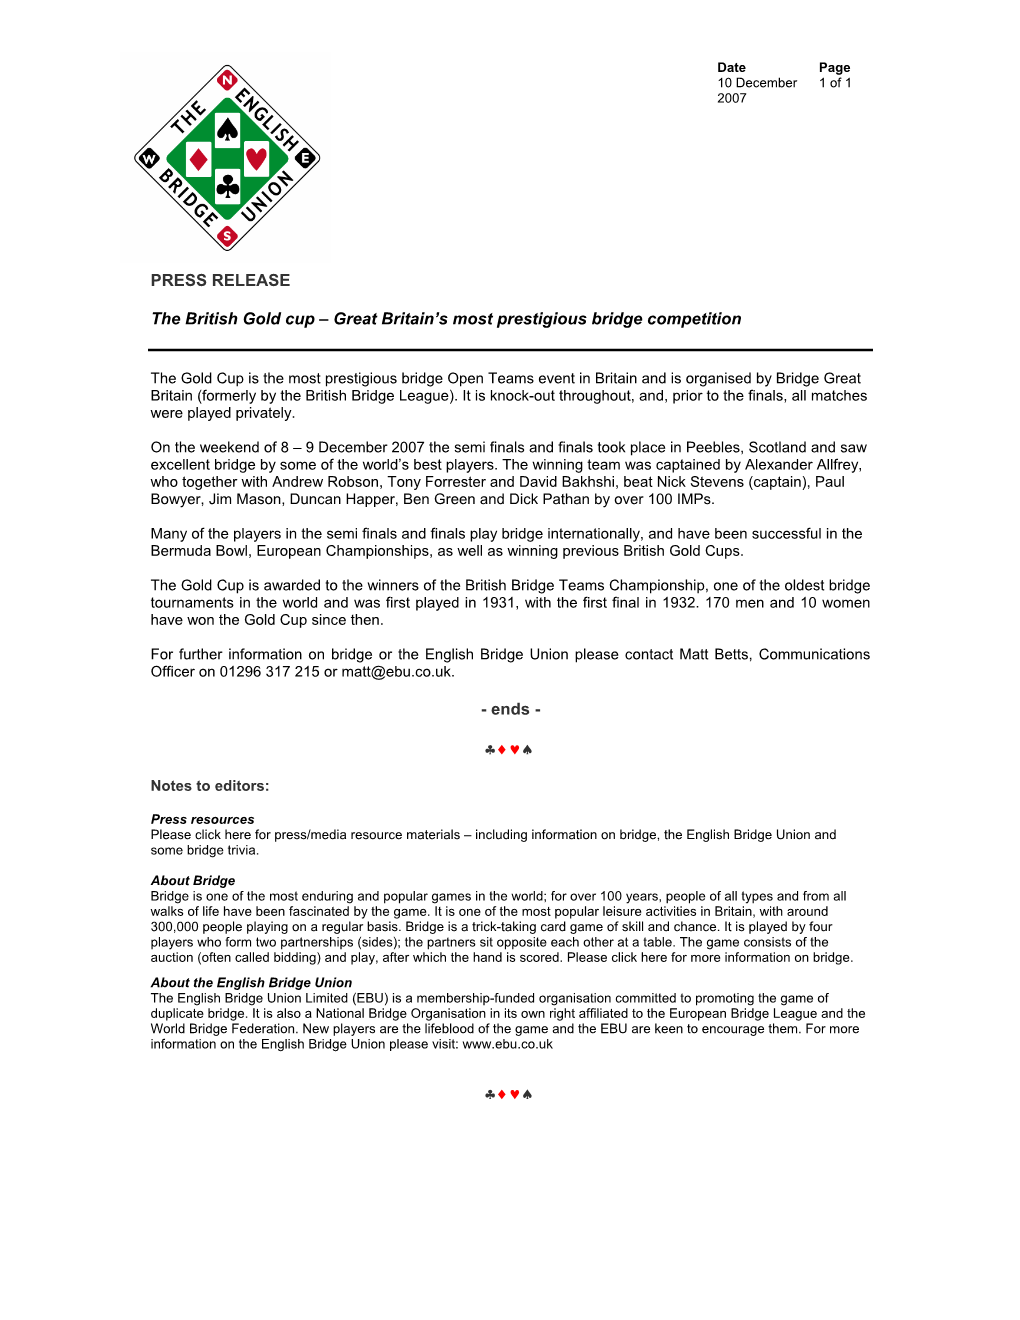 PRESS RELEASE the British Gold Cup – Great Britain's Most